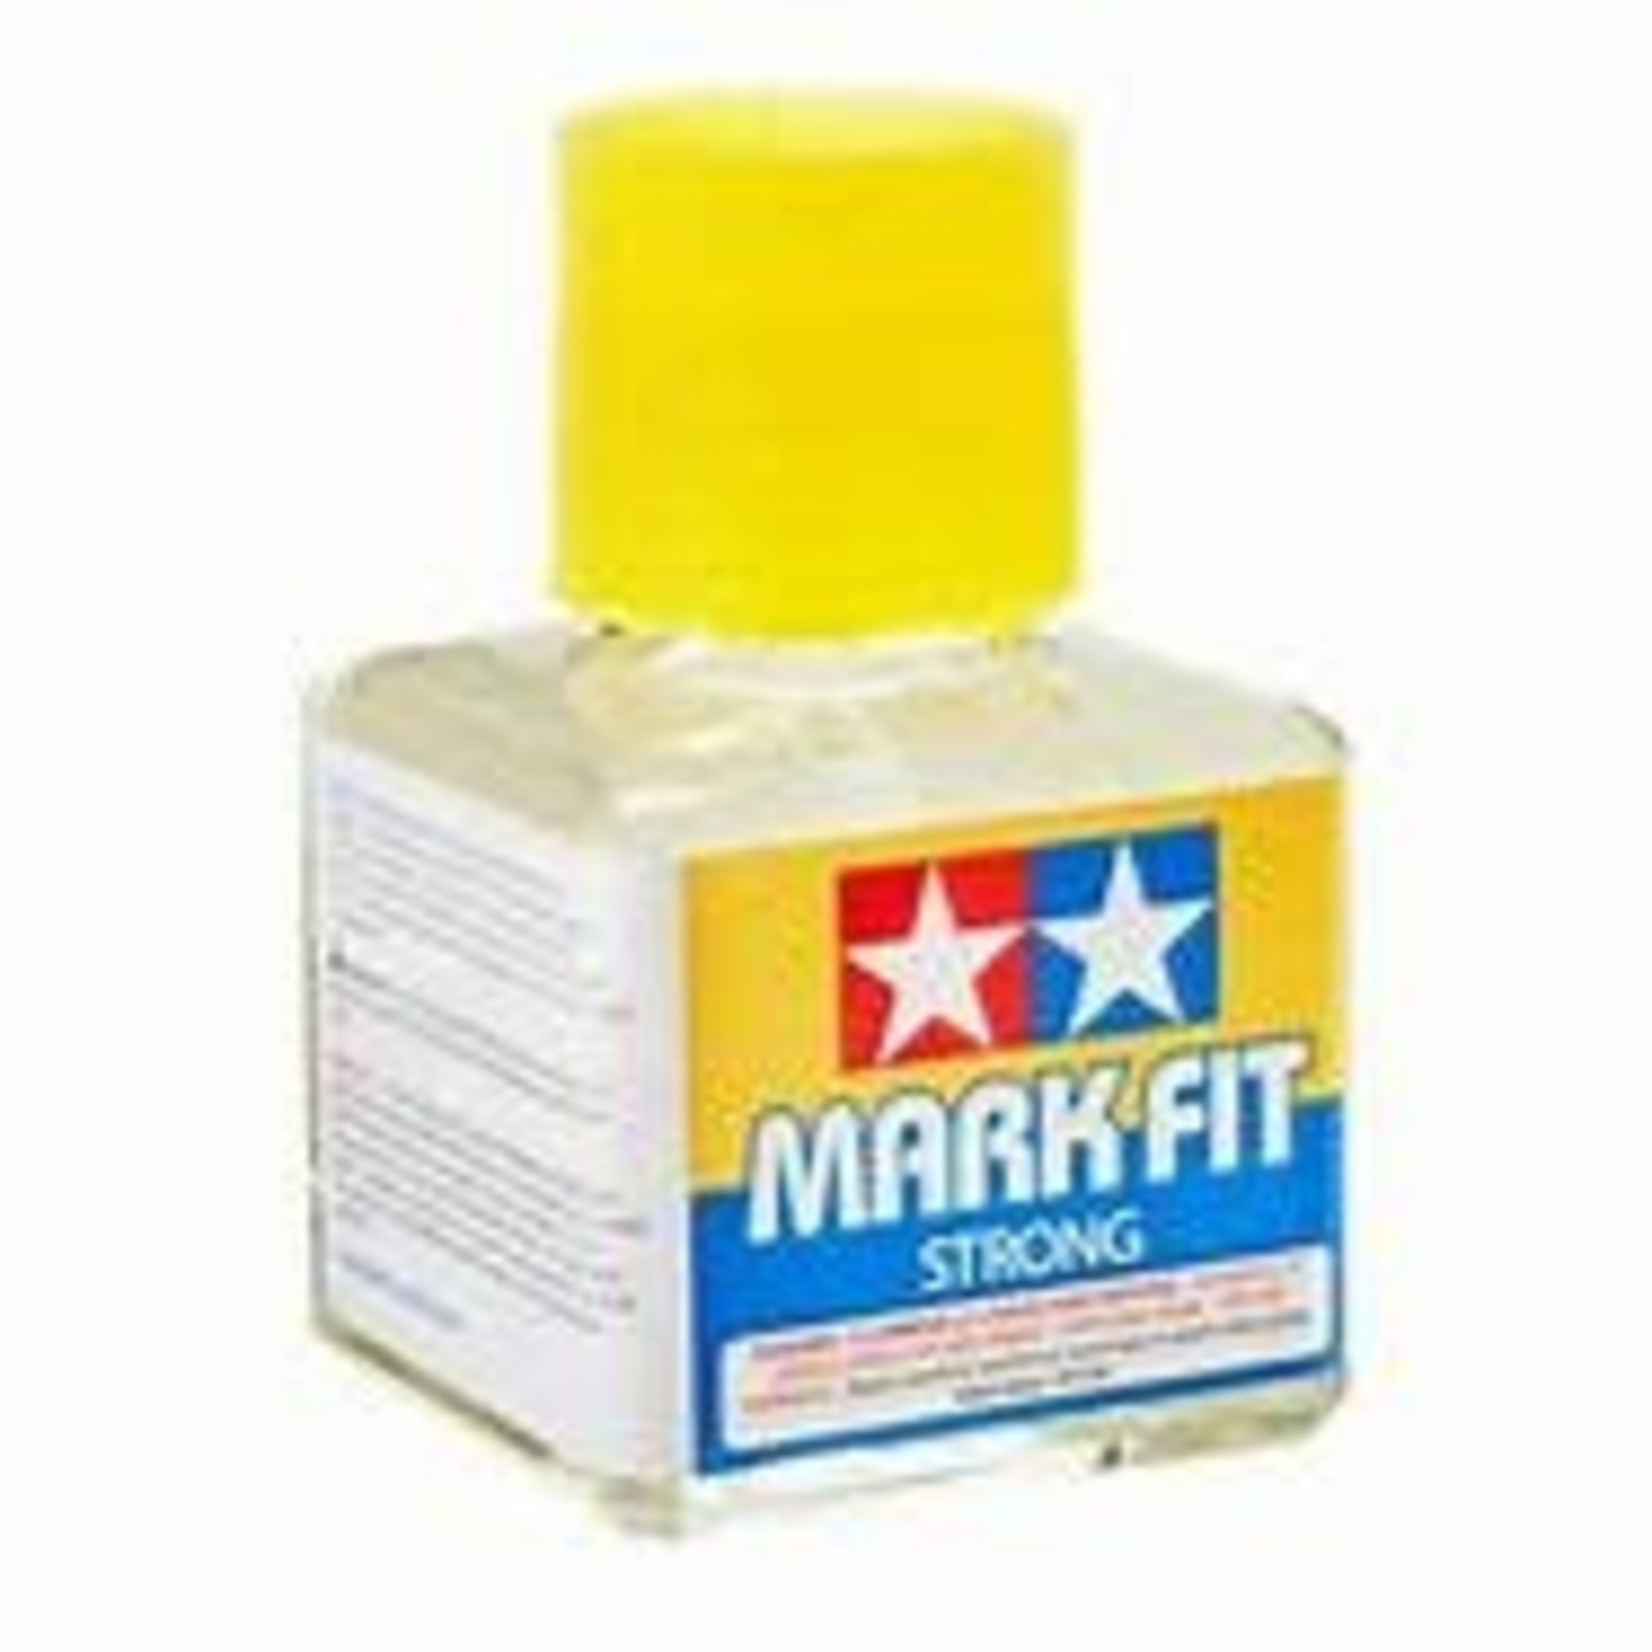 Tamiya Mark Fit, Strong Solvent 40ml Bottle